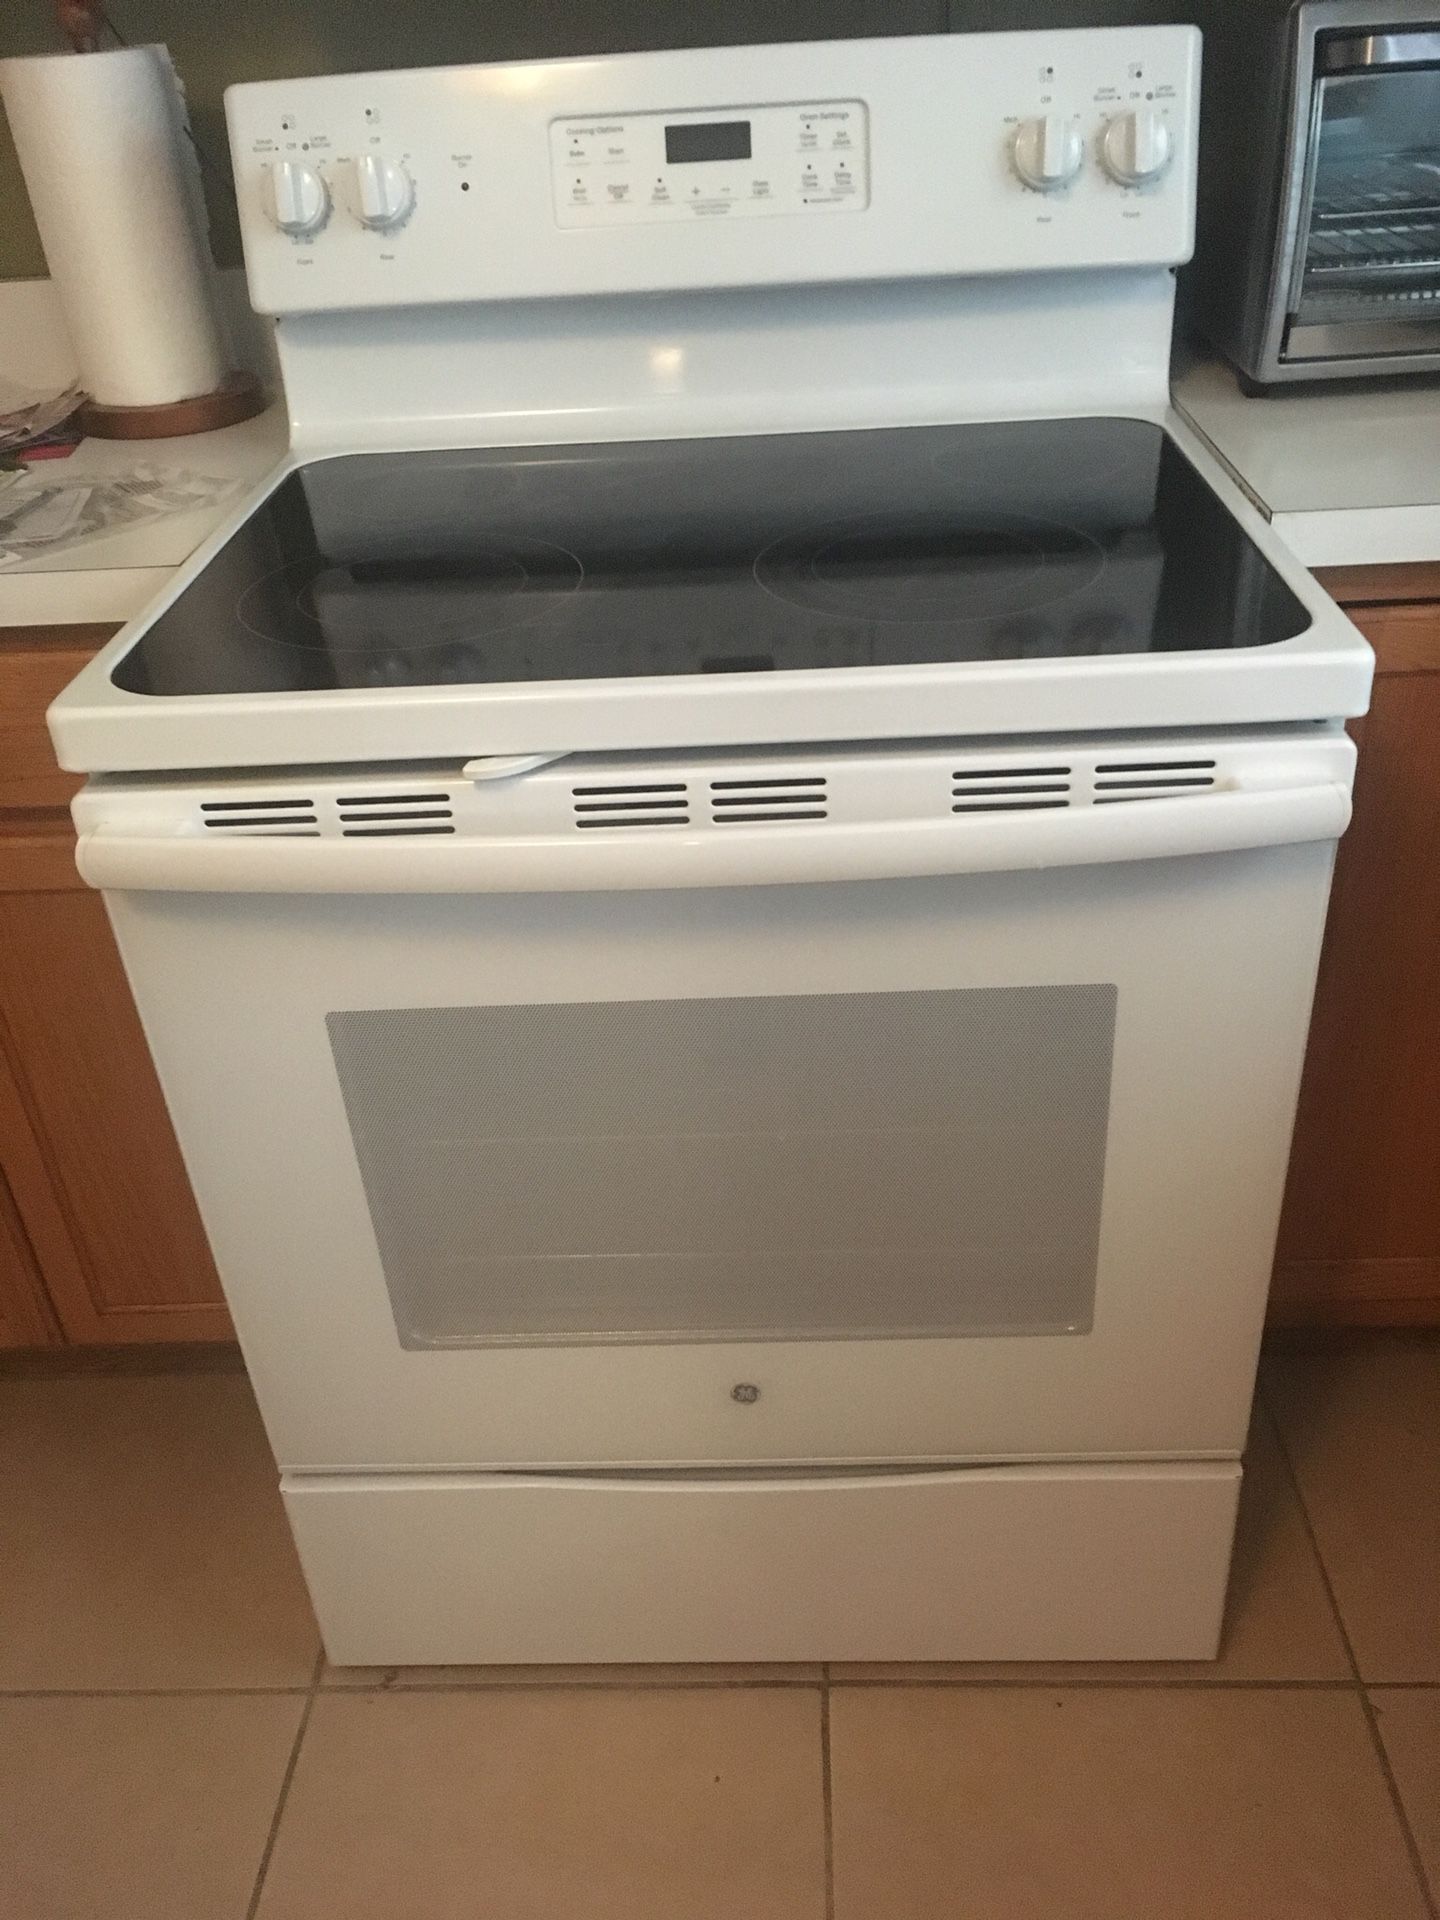 GE flat top electric stove. Excellent condition. $250.00